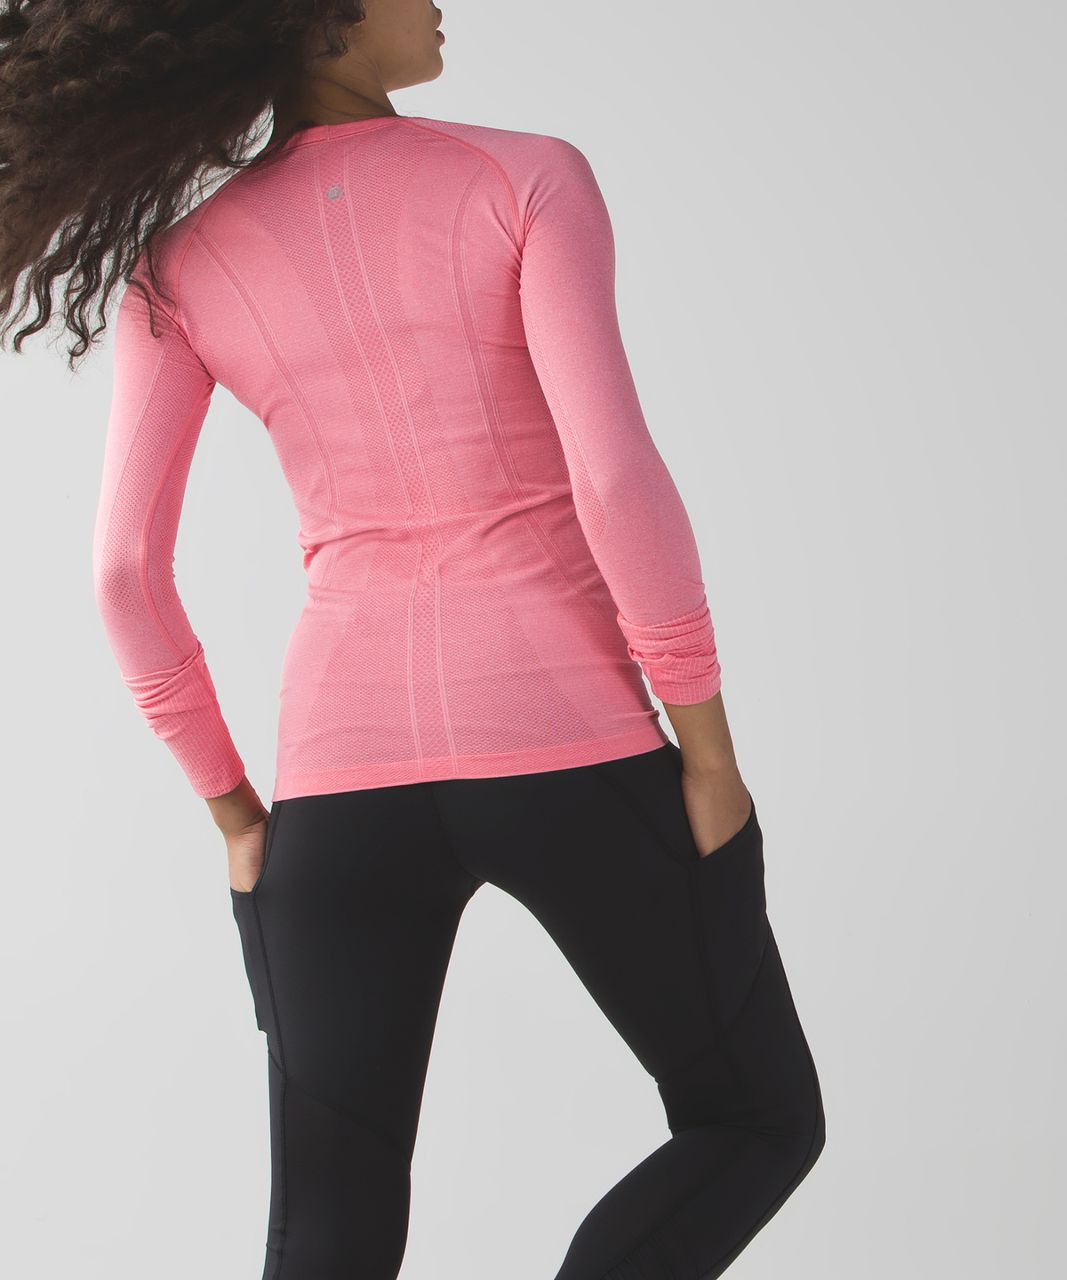 Workout Staples for 2019: My lululemon Swiftly Tech Love Affair